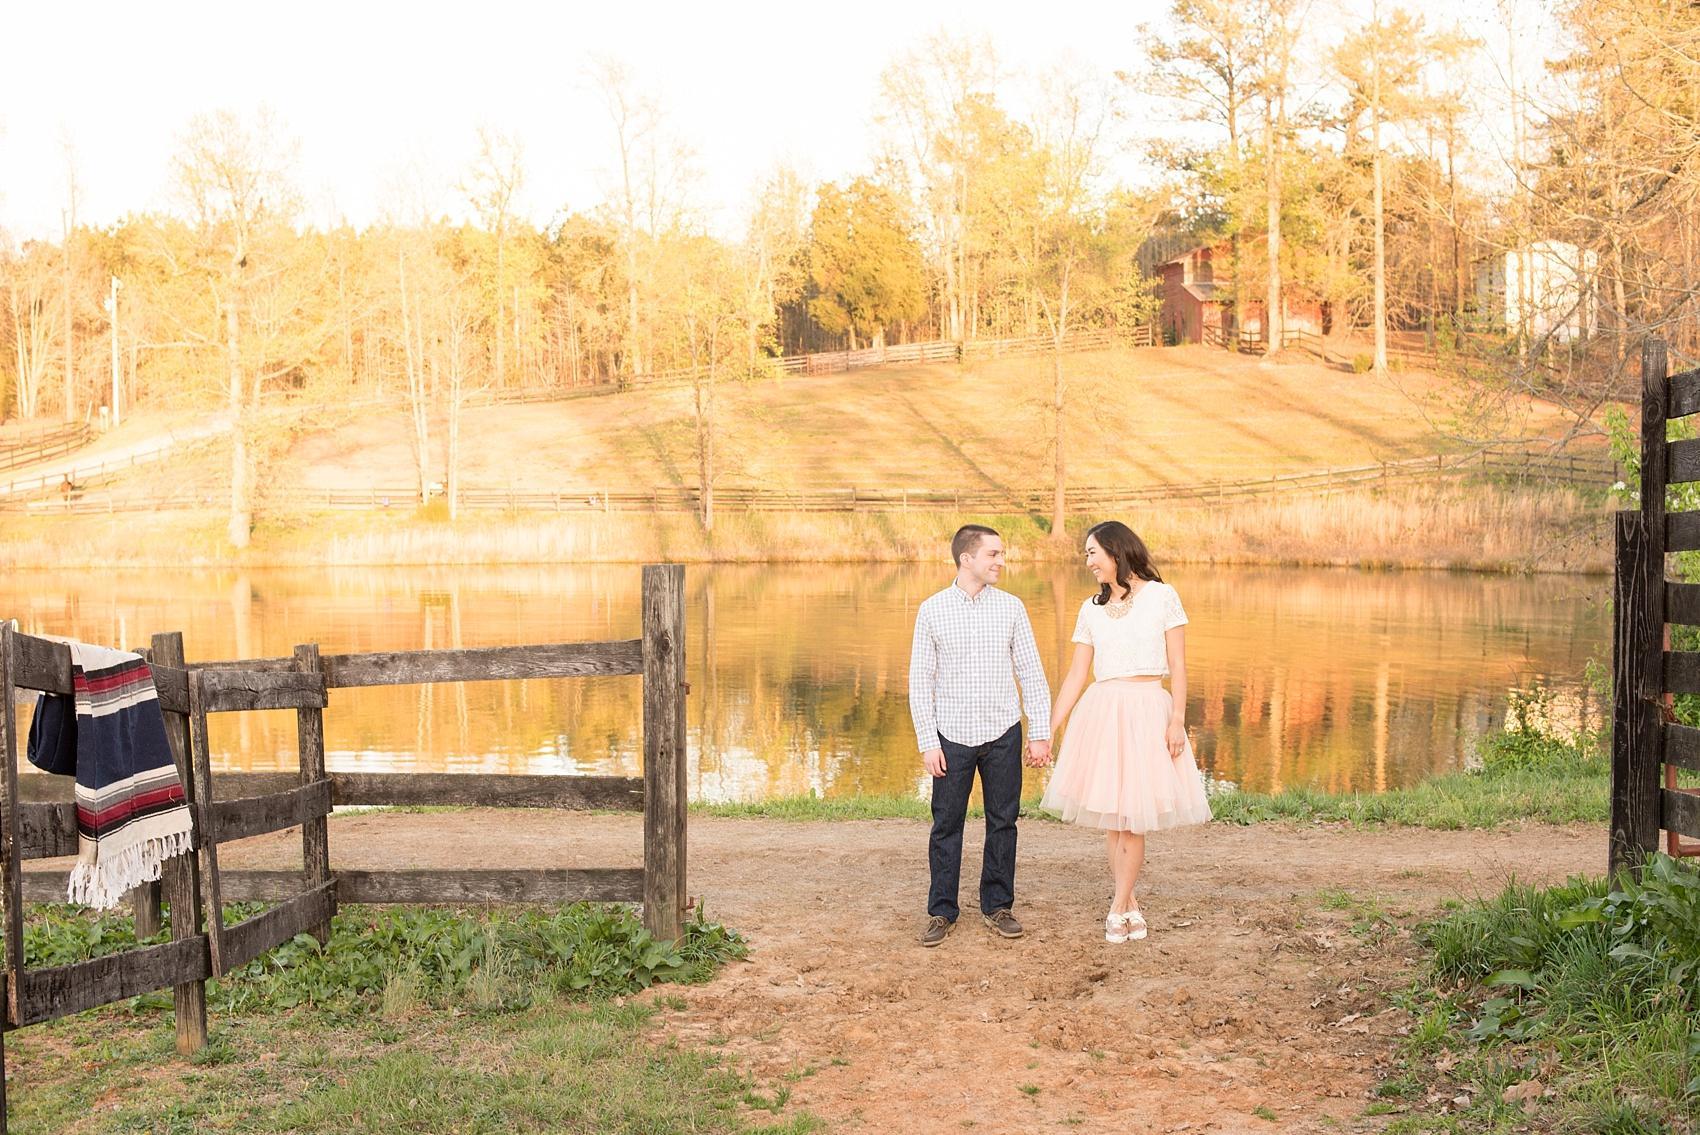 Raleigh farm engagement photos by a lake. Images by Mikkel Paige Photography.